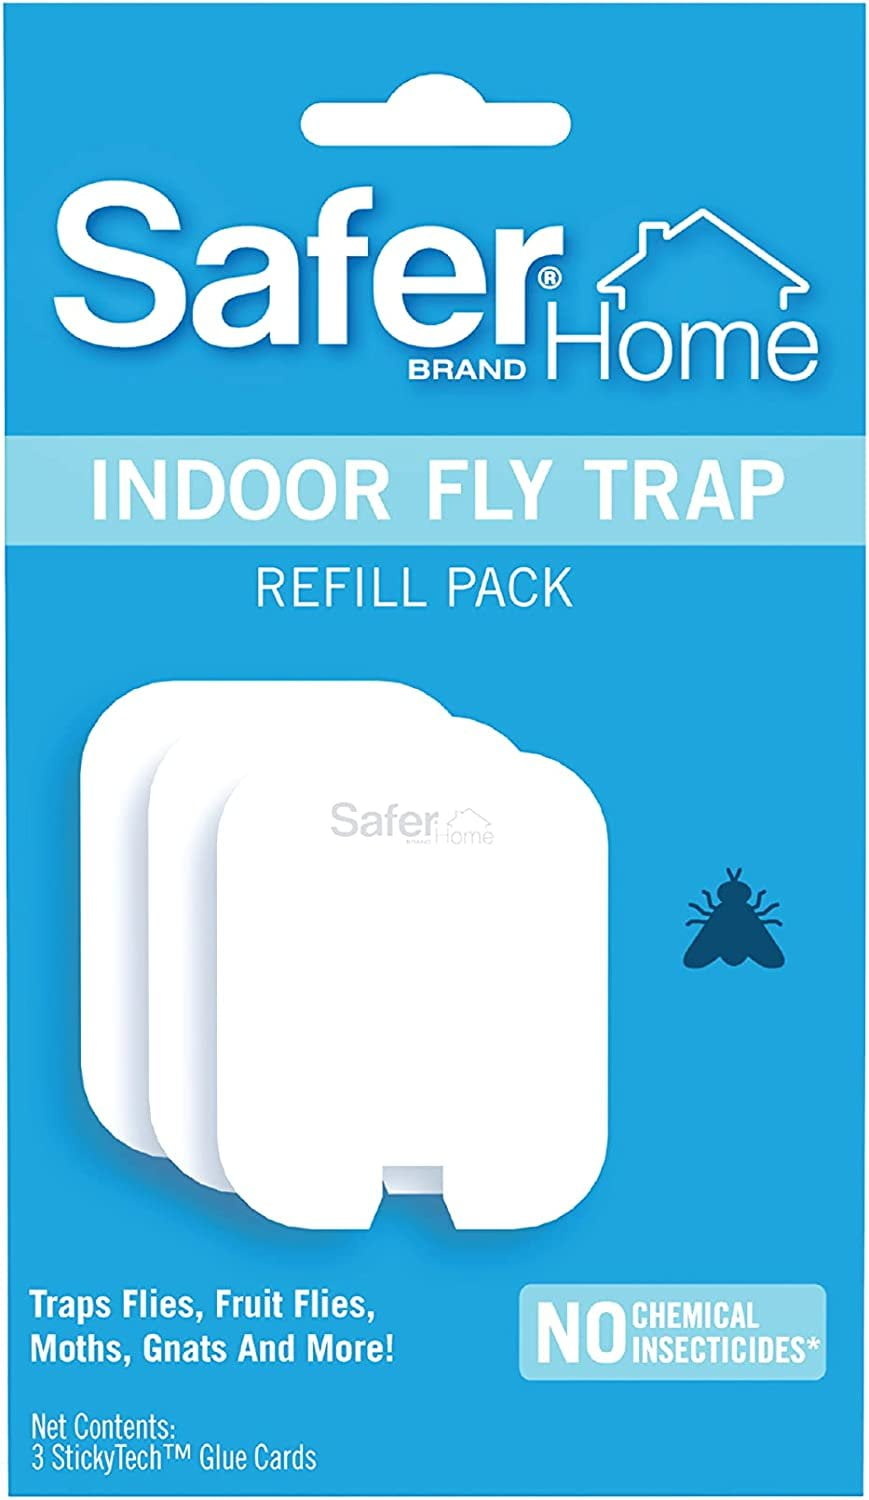 safer brand home indoor fly trap｜TikTok Search